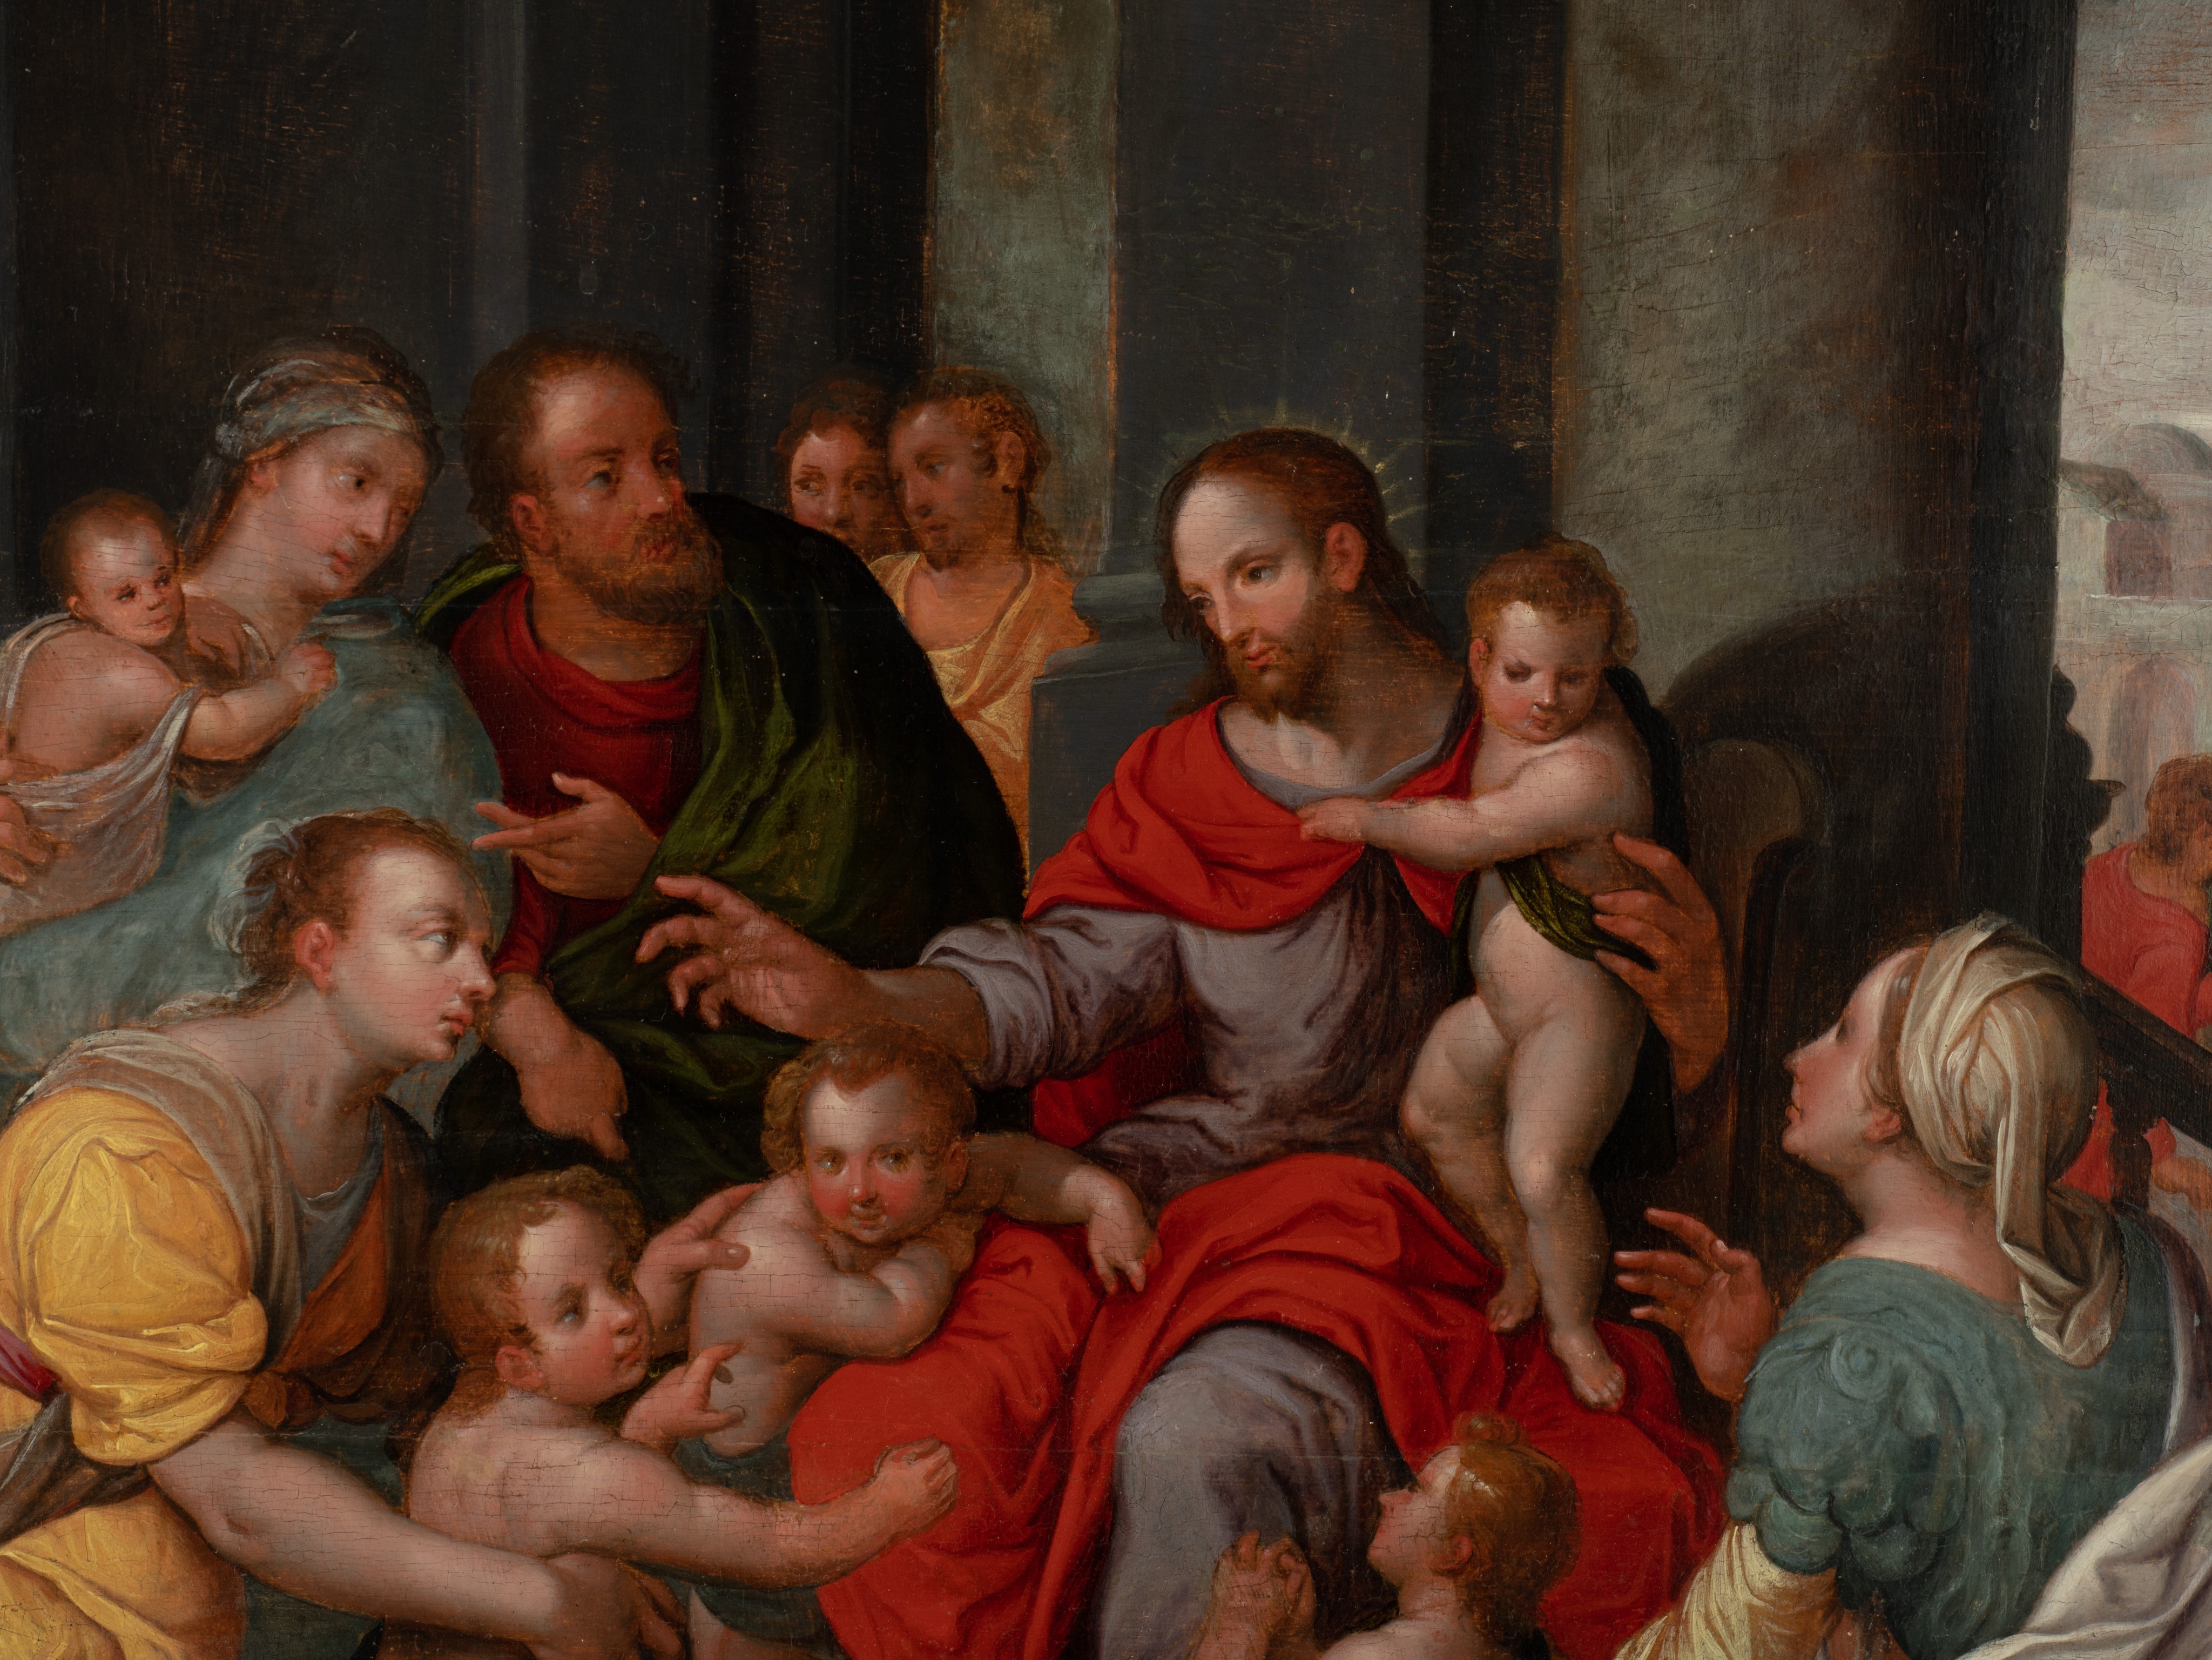 Attributed to Frans Floris, 'Let the children come to me', 16thC, oil on panel, 71 x 95 cm - Image 7 of 9